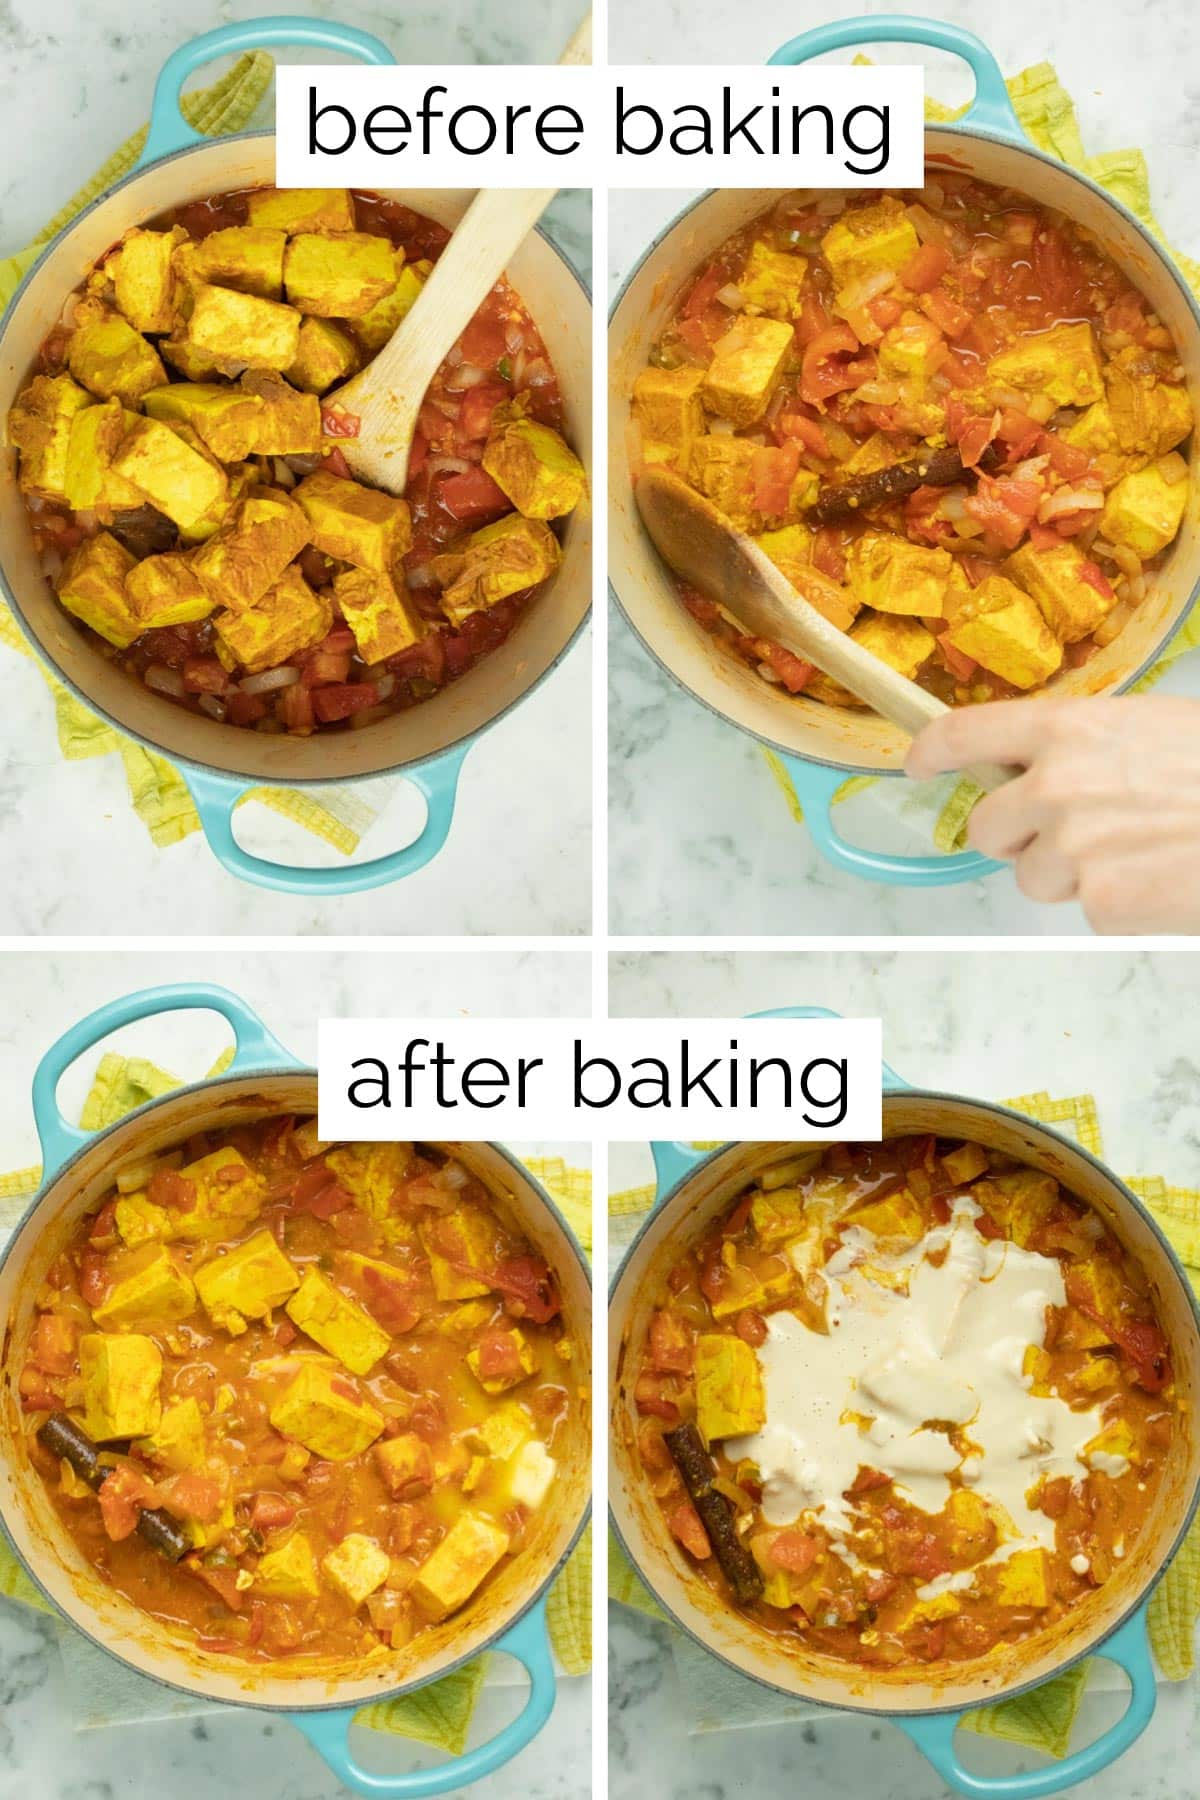 image collage showing the curry before and after baking